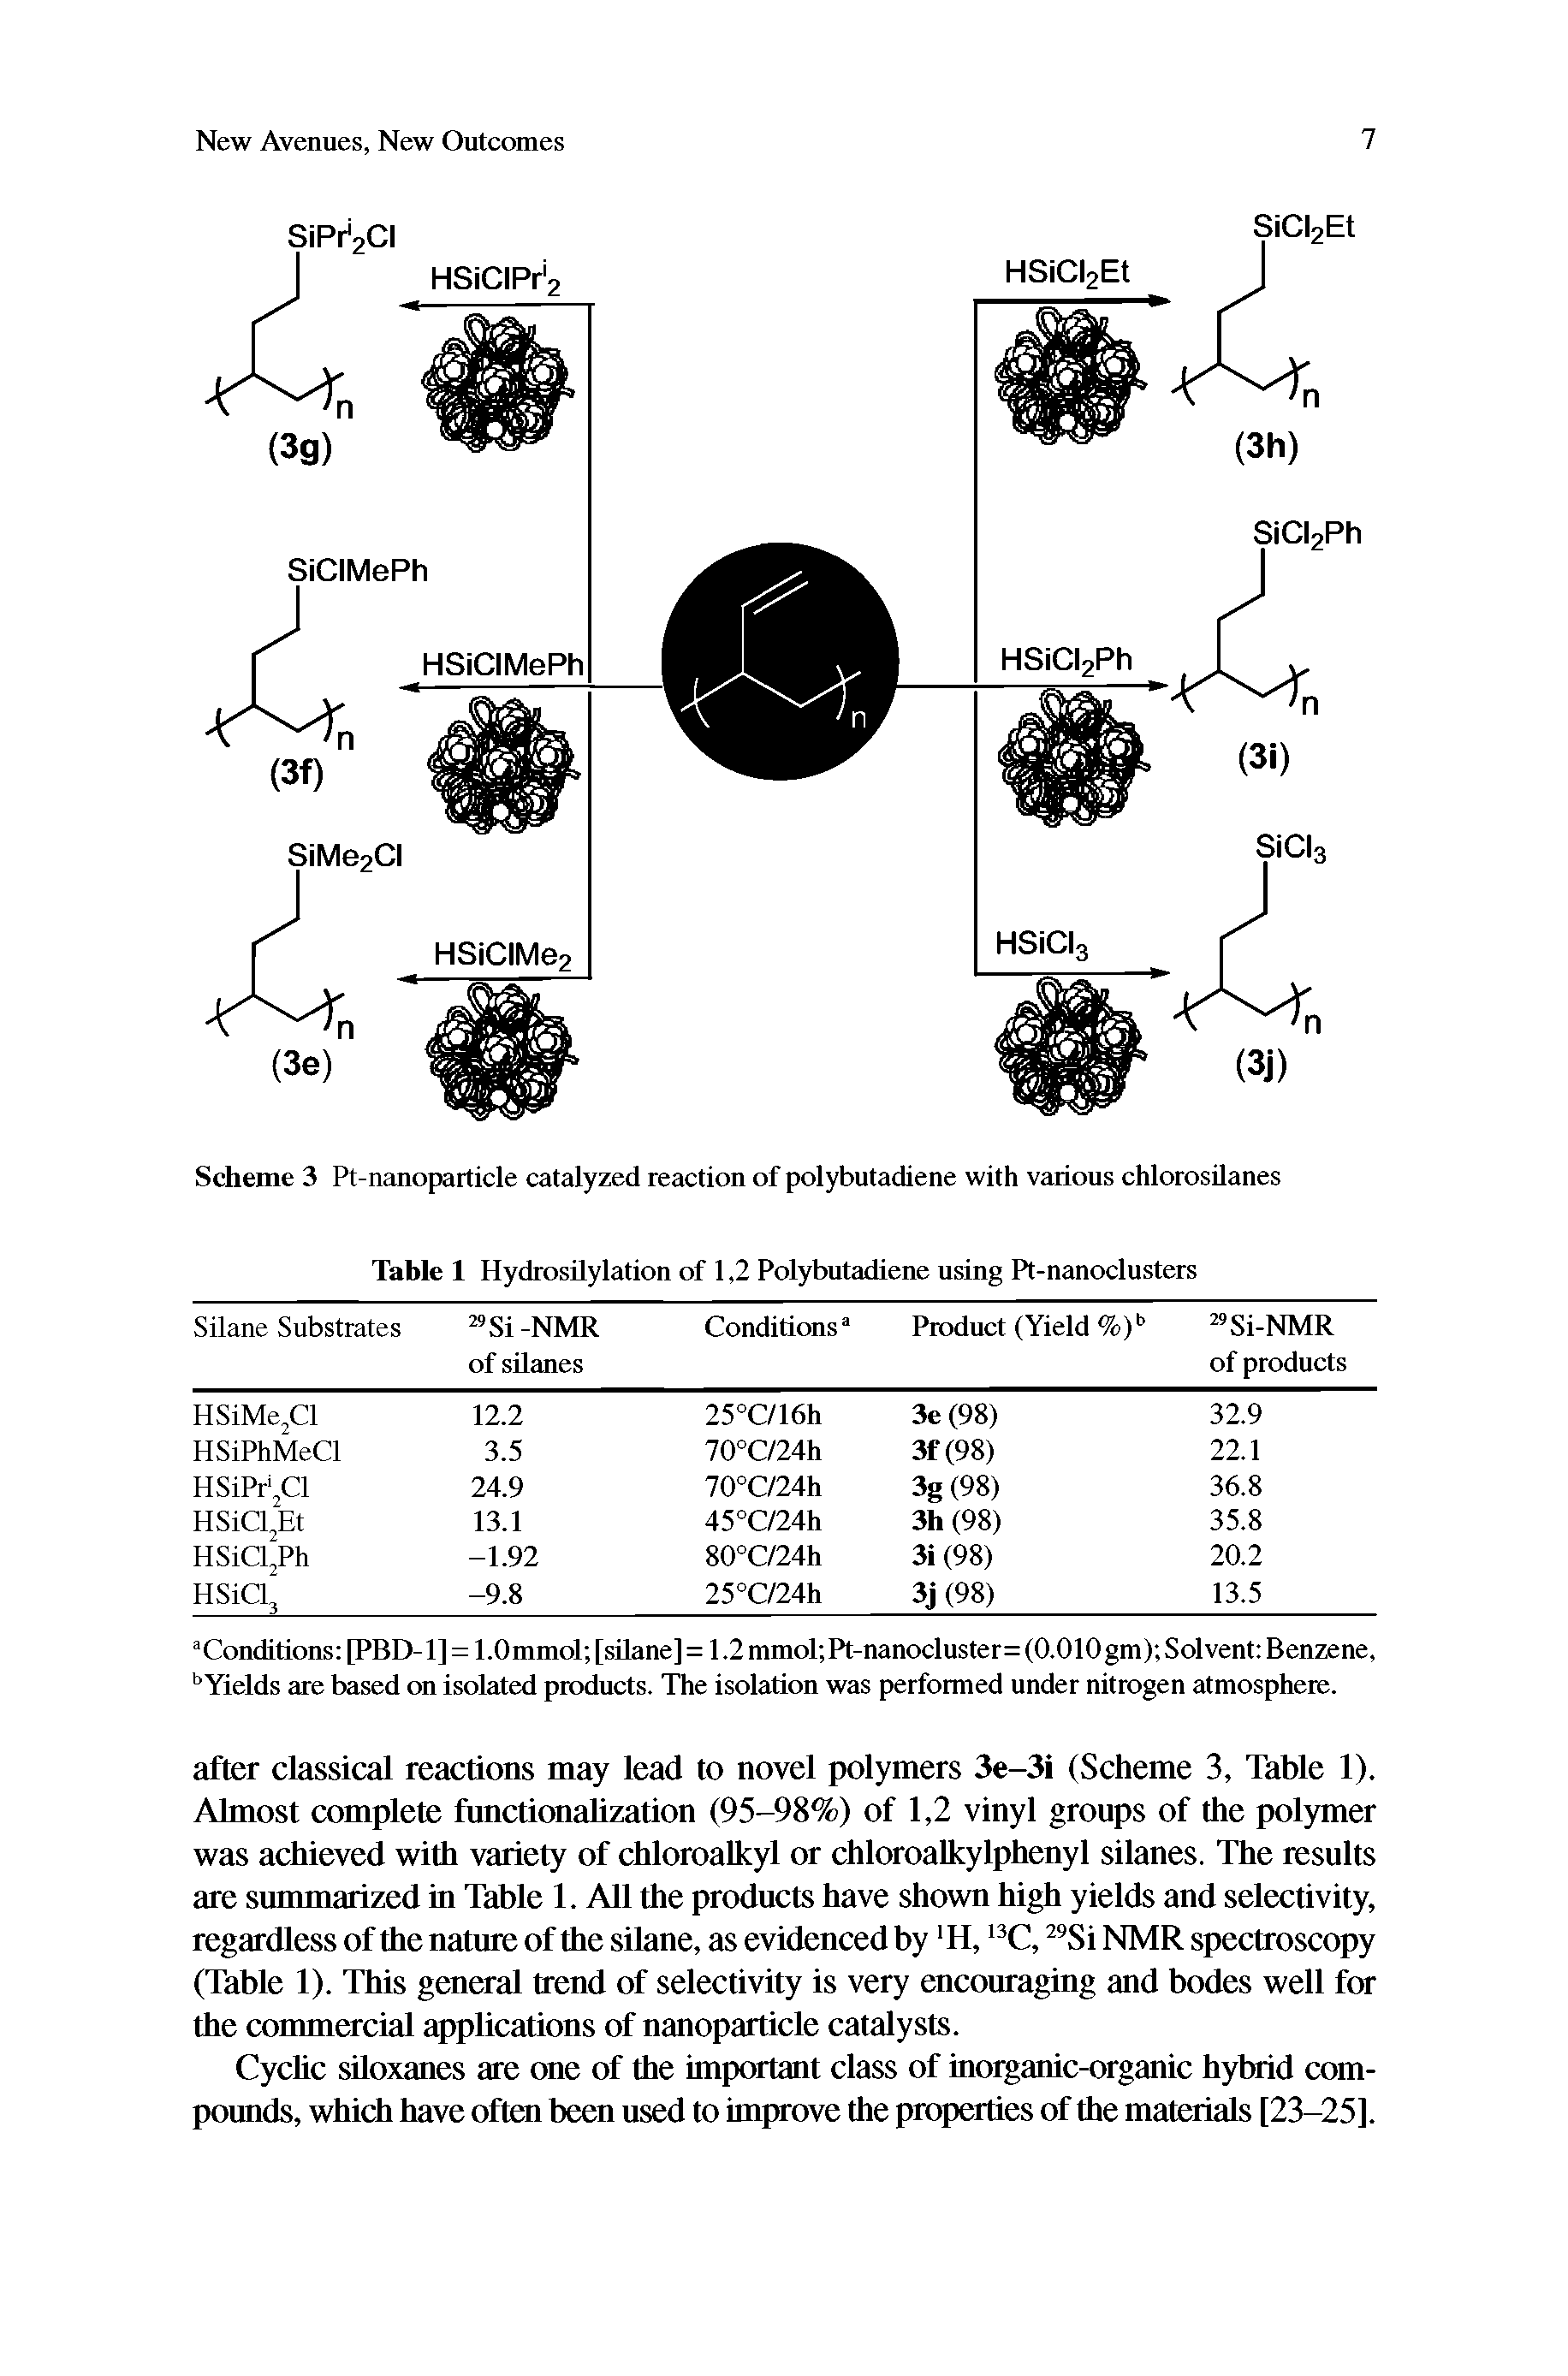 Scheme 3 Pt-nanoparticle catalyzed reaction of polybutadiene with various chlorosUanes...